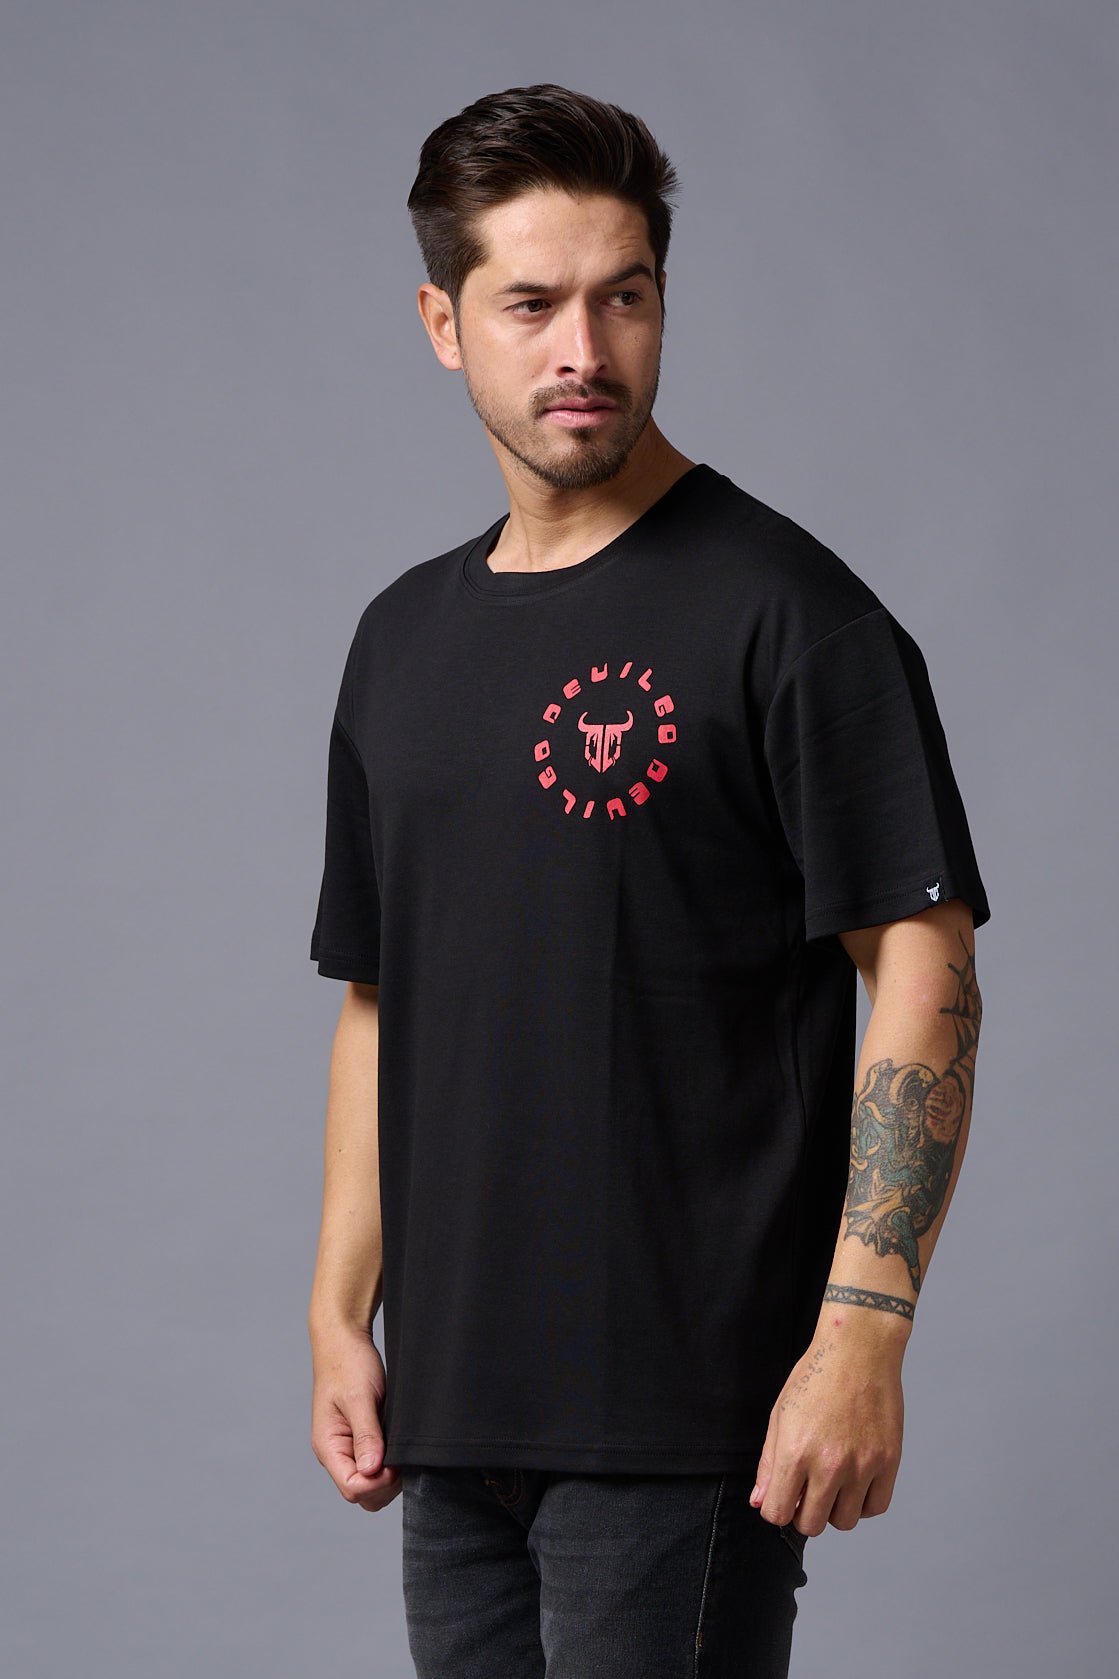 Never Give Up (in Red) Printed Black Oversized T-Shirt for Men - Go Devil